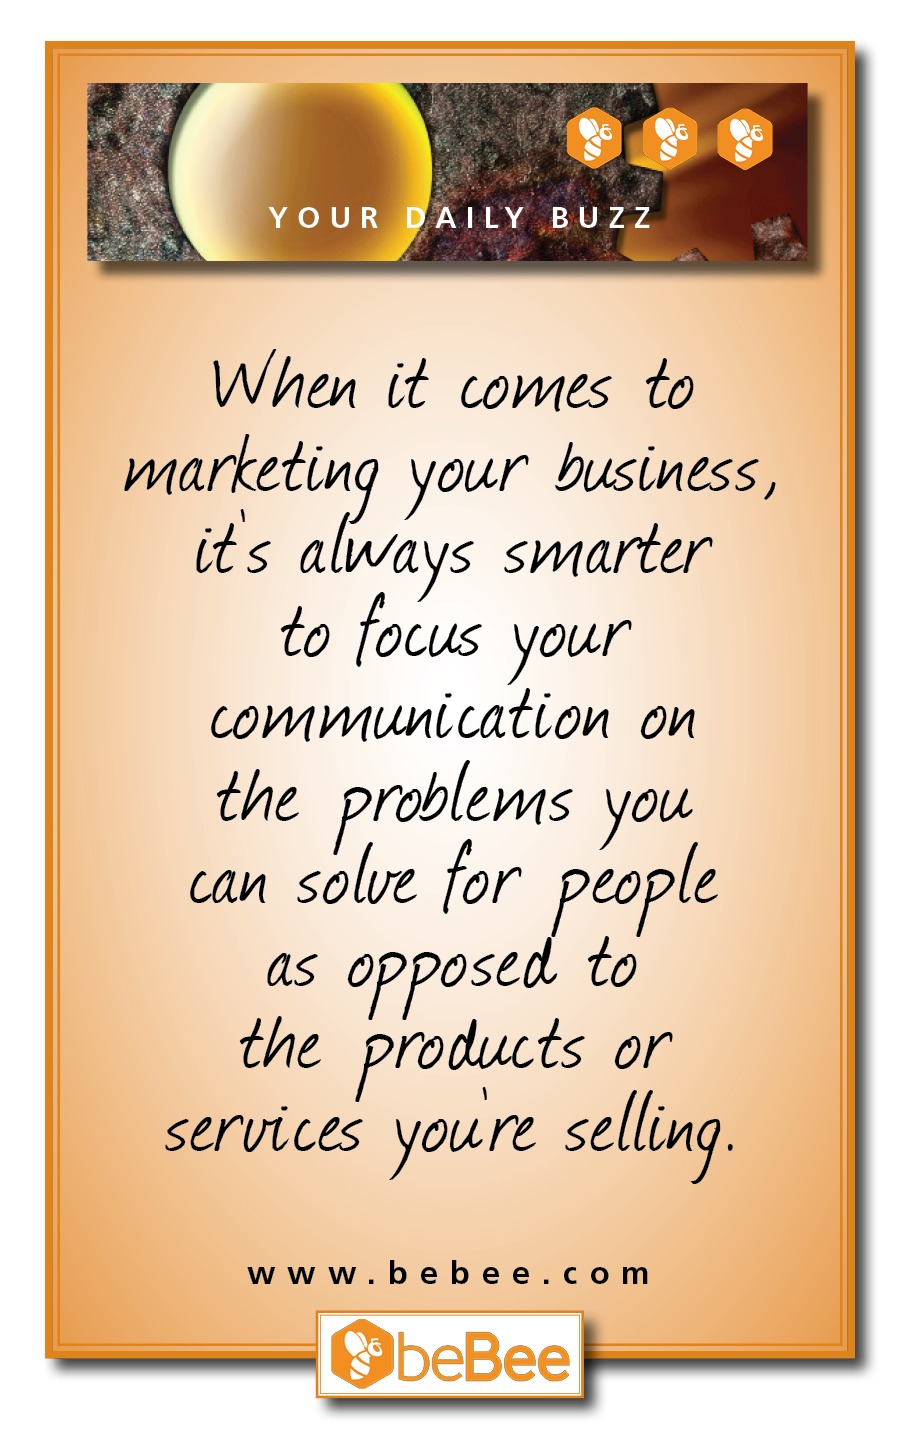 YOUR AlILY BUZZ

When it comes to
marketing your business,
its always smarter
to focus your
communication on

the problems you
can solve for people
as opposed. to
the products or
services youre selling.

www.bebee.com